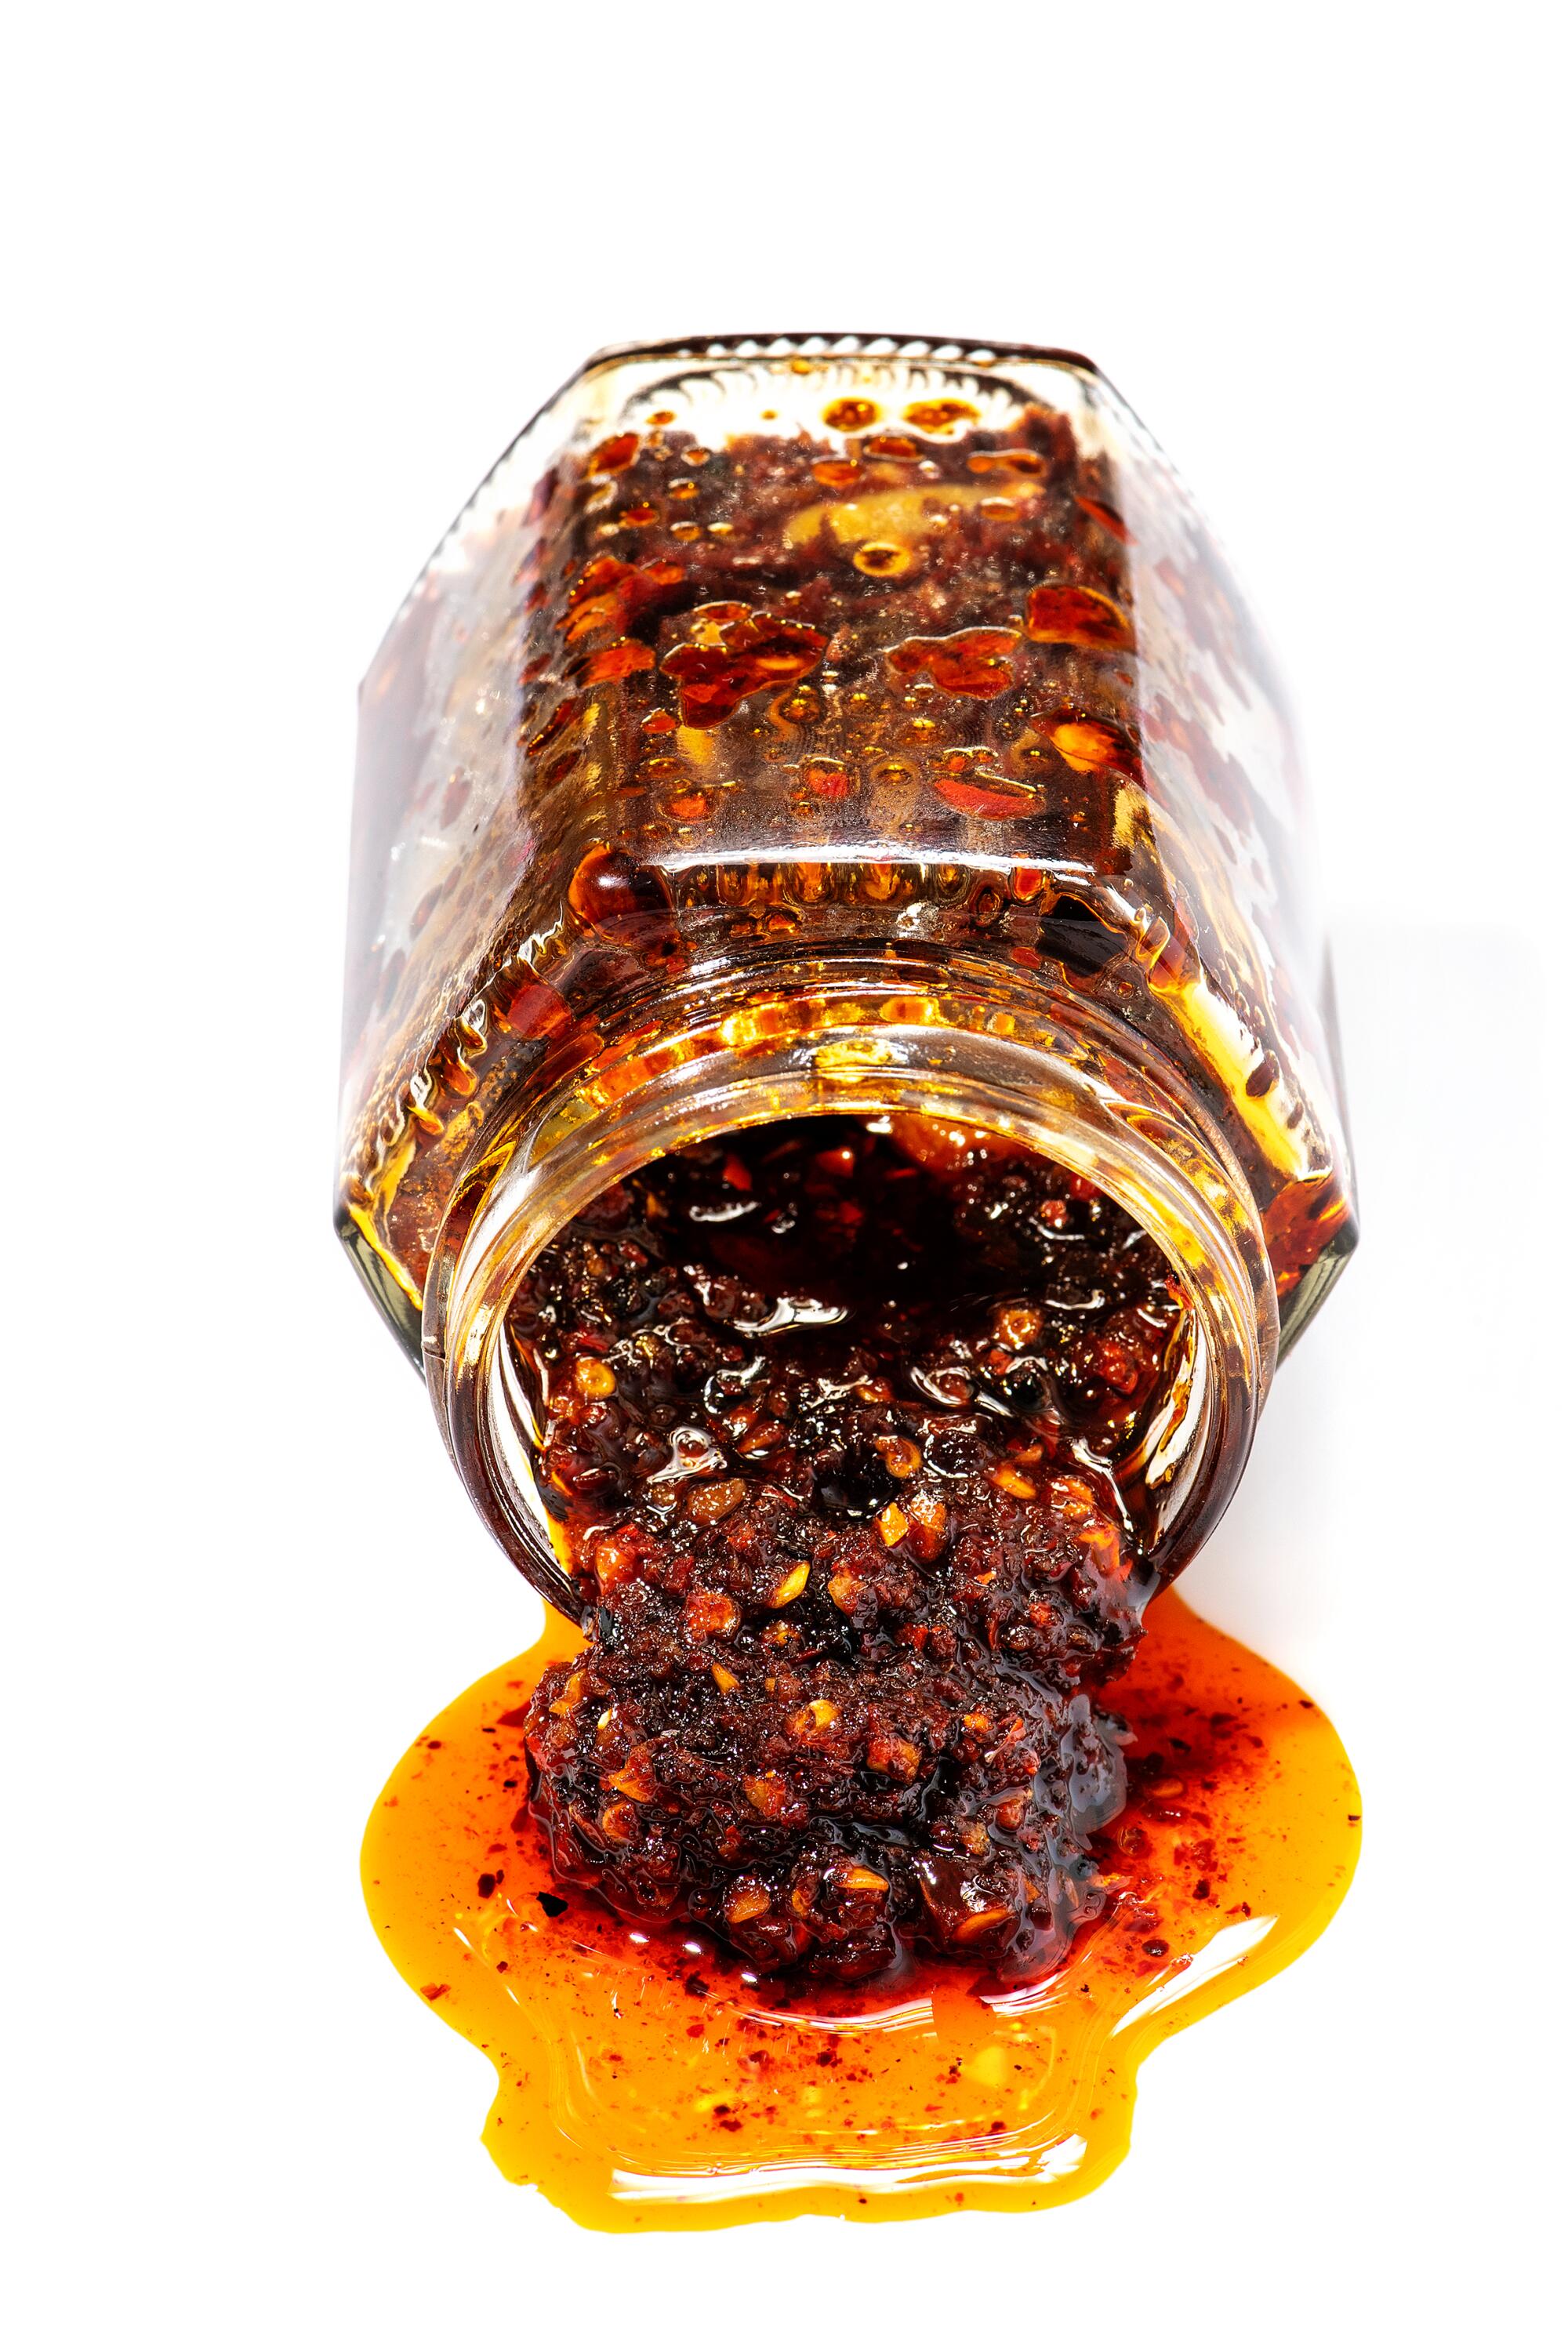 A jar of chili sauce can be found on most tables at restaurants serving dumplings in the San Gabriel Valley.